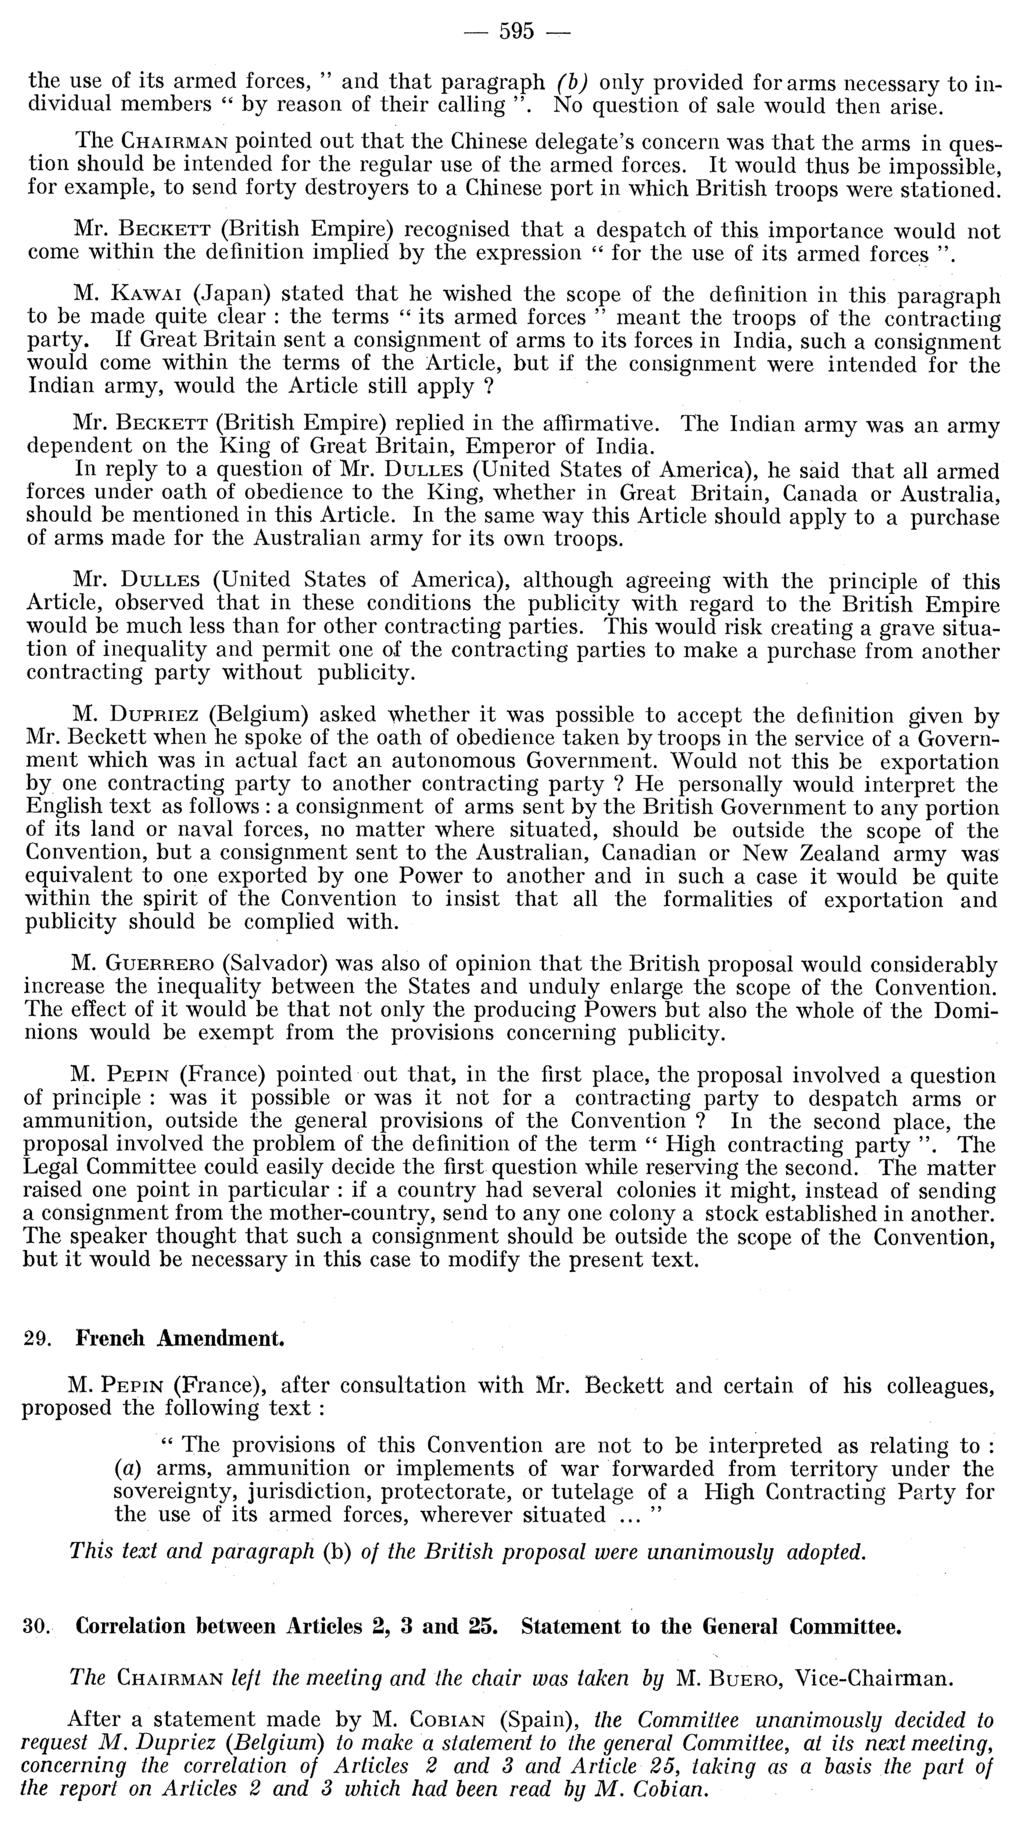 595 the use of its armed forces, " and that paragraph (b) only provided for arms necessary to individual members "by reason of their calling ". No question of sale would then arise.